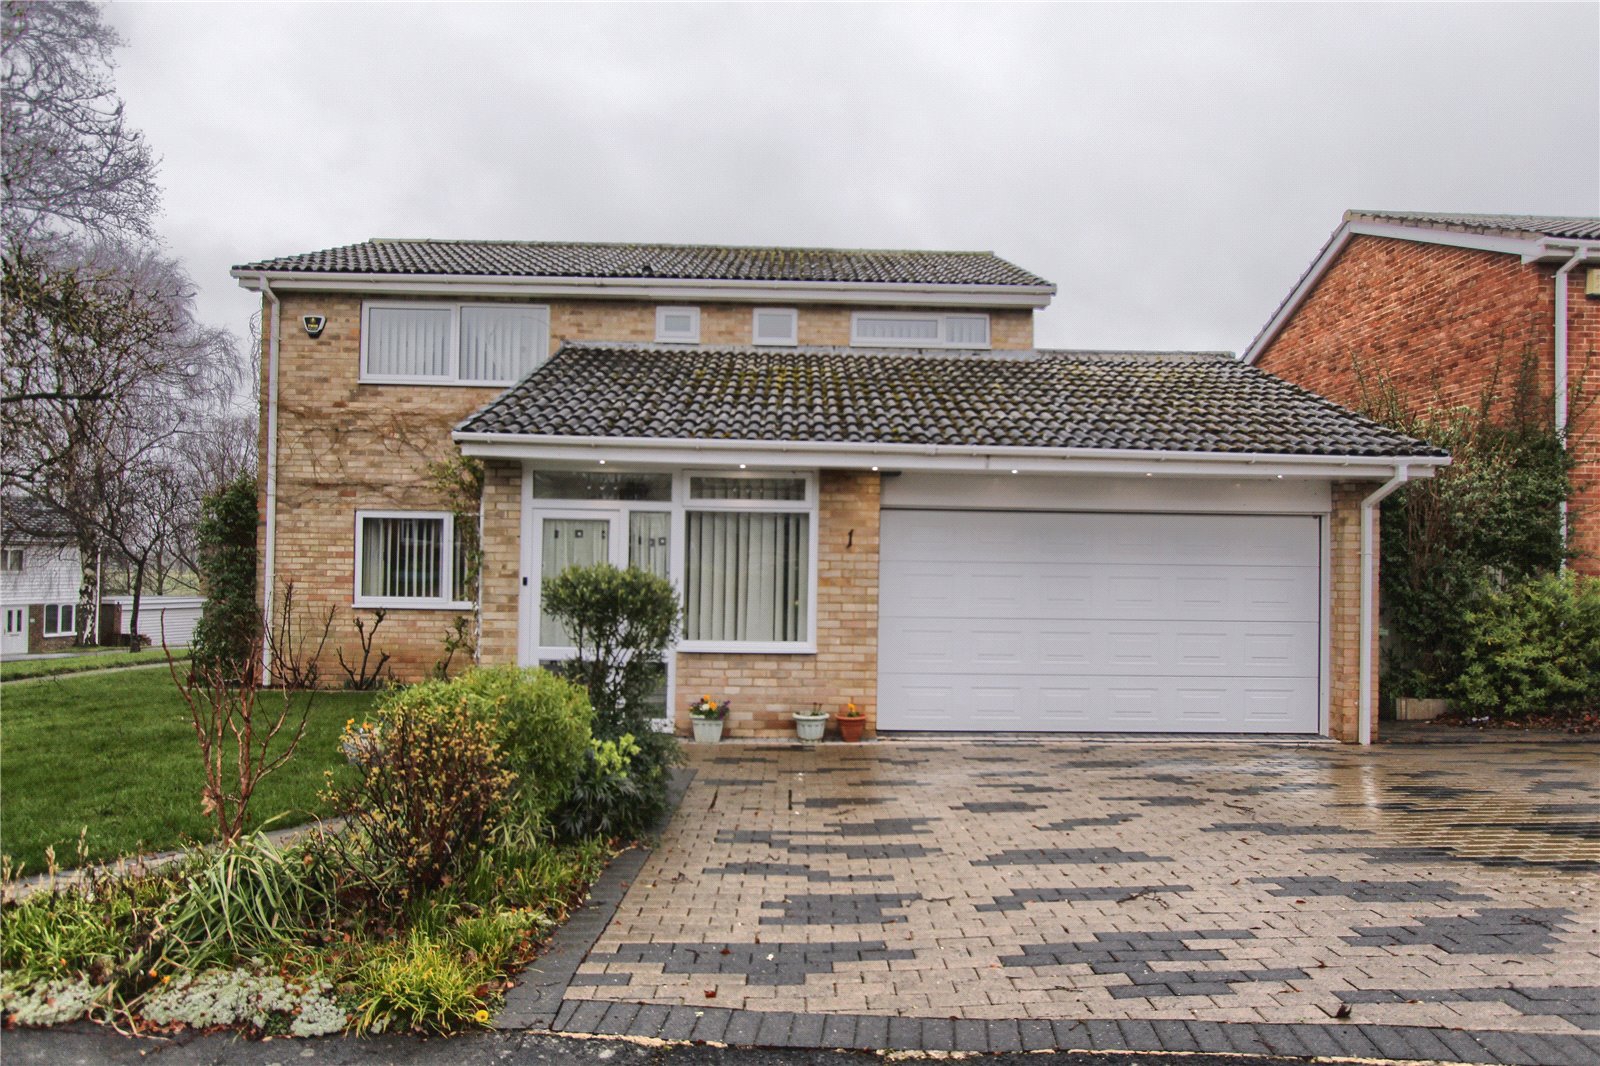 4 bed house to rent in Foxton Close, Yarm 1